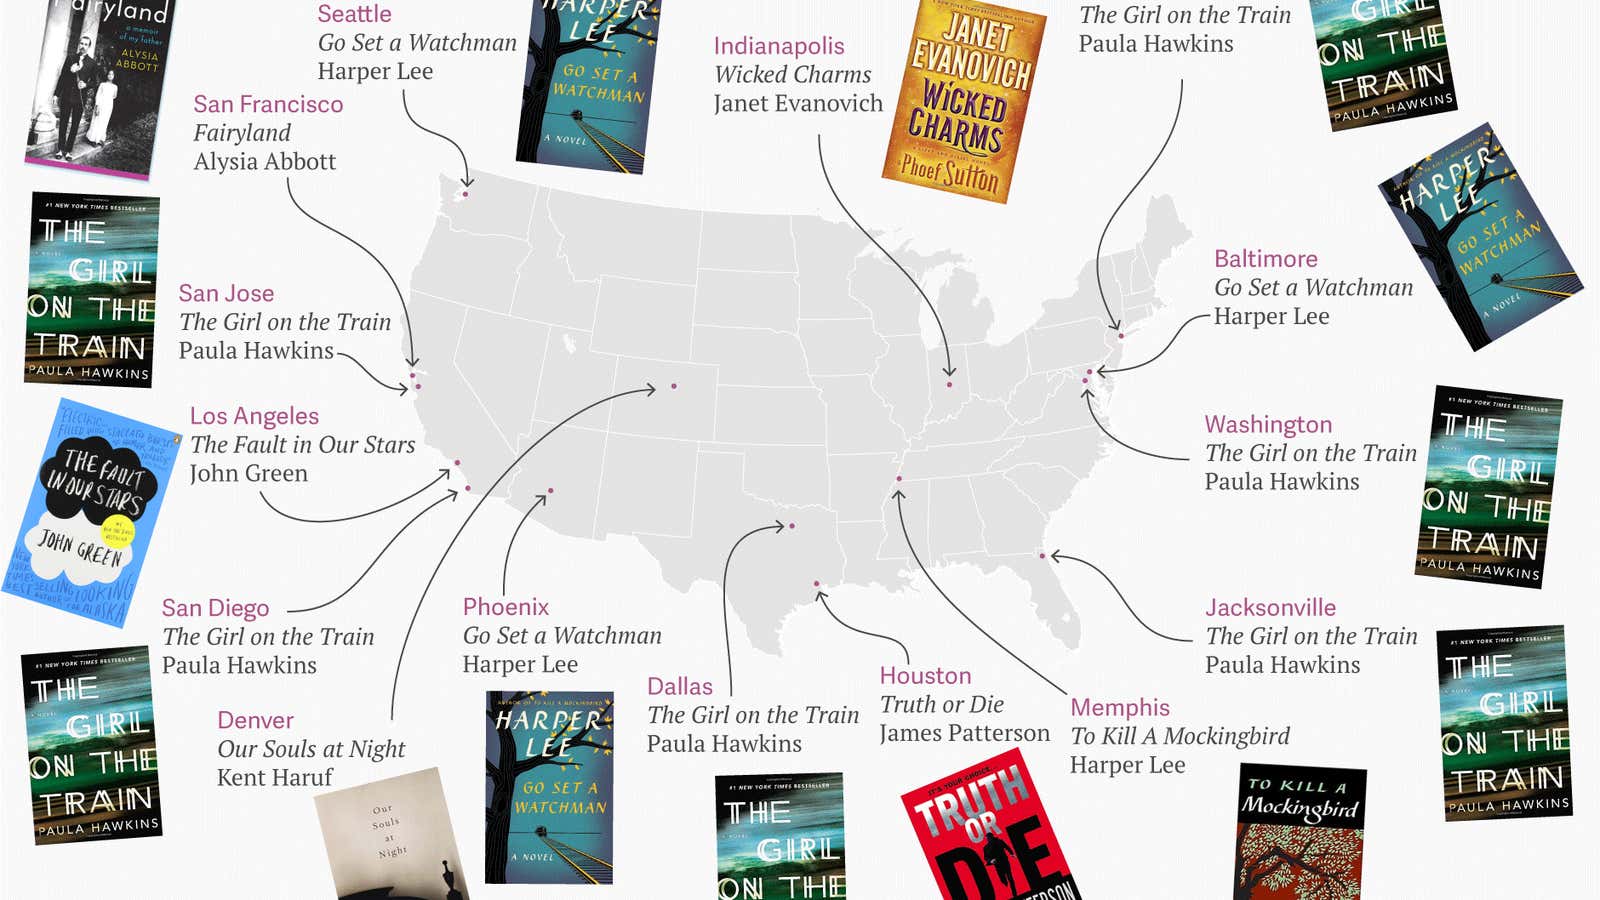 The most popular books in U.S. public libraries, mapped by city